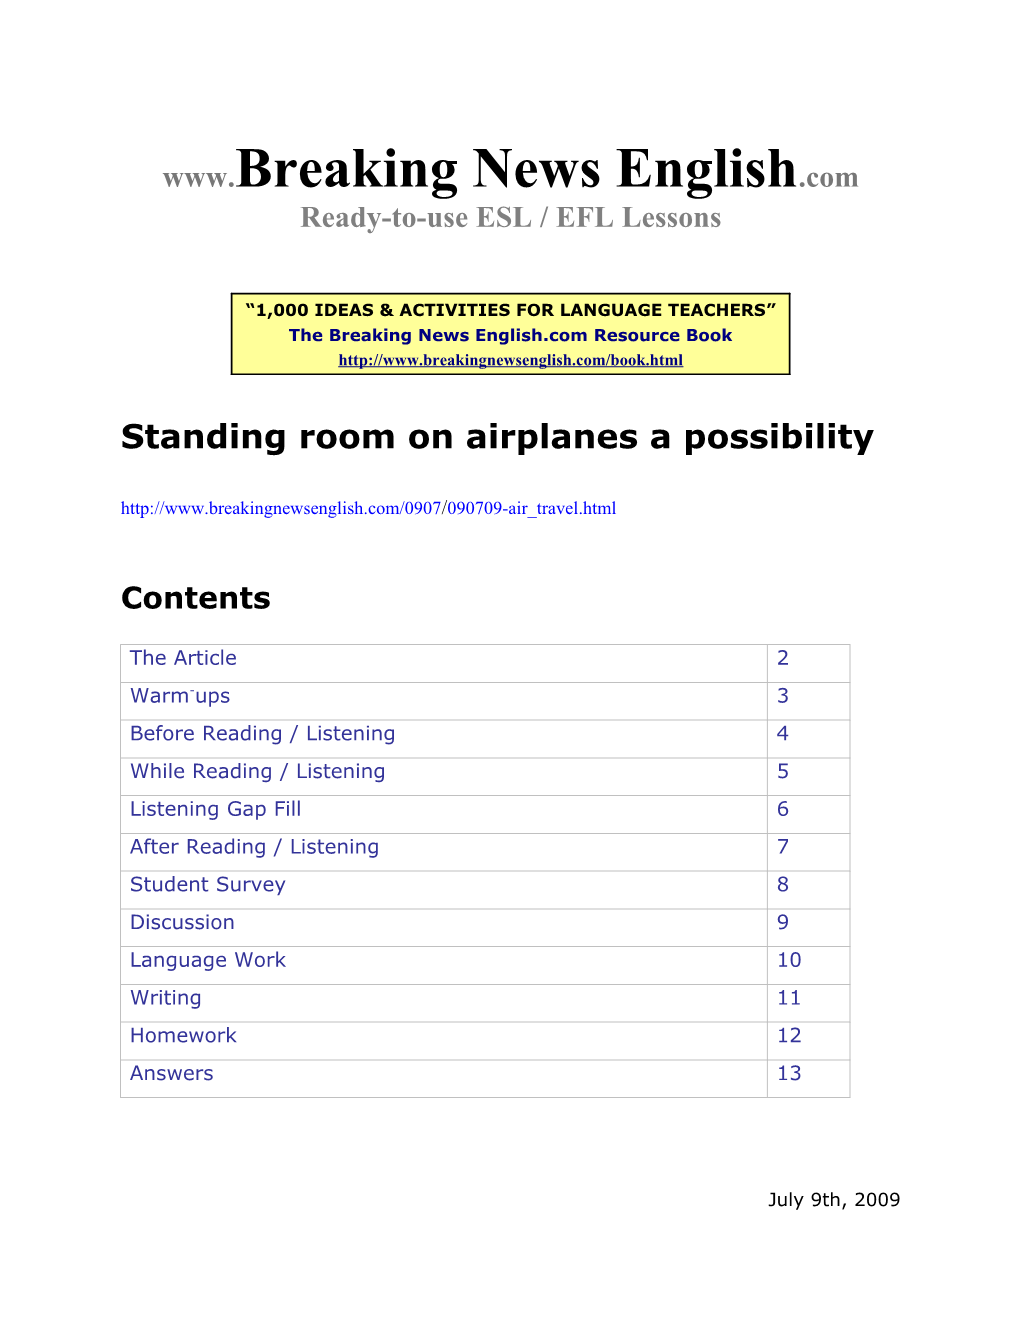 ESL Lesson: Standing Room on Airplanes a Possibility